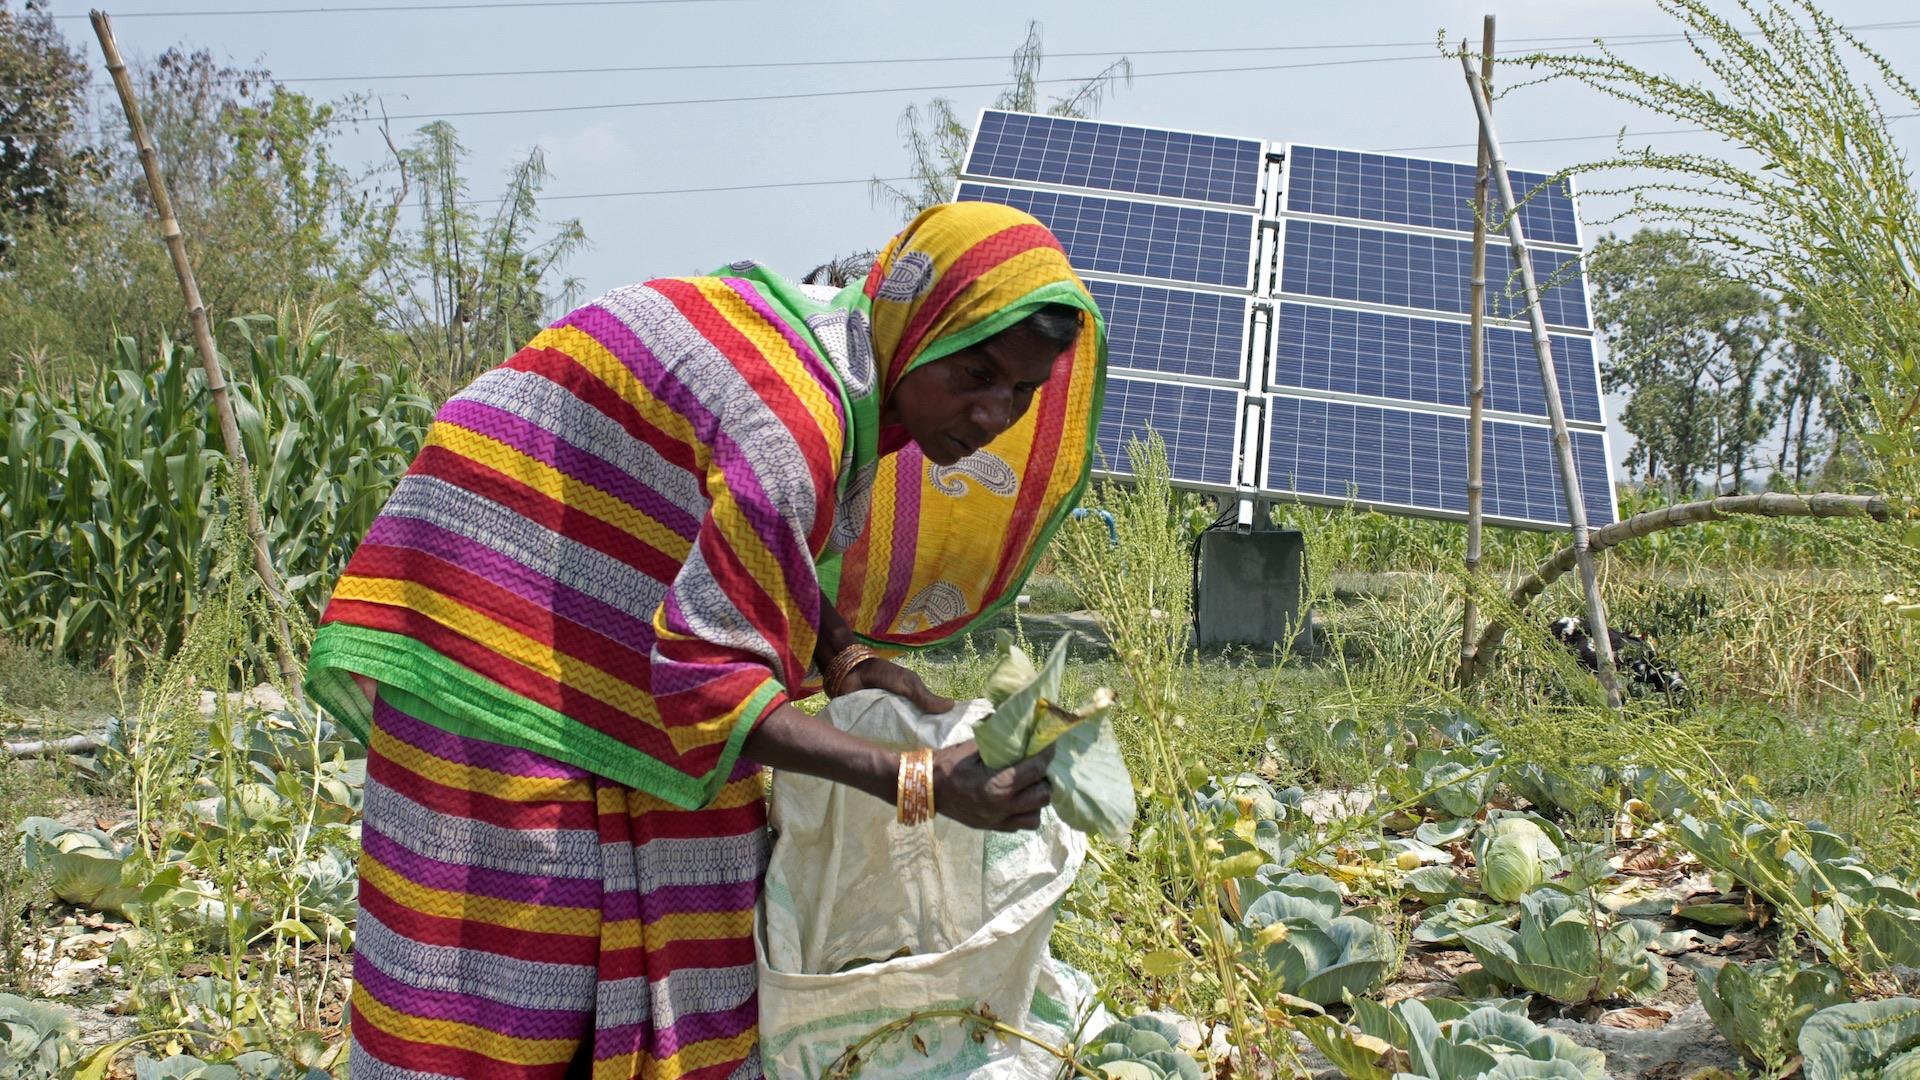 Woman gathering crops in a field with solar panel in background